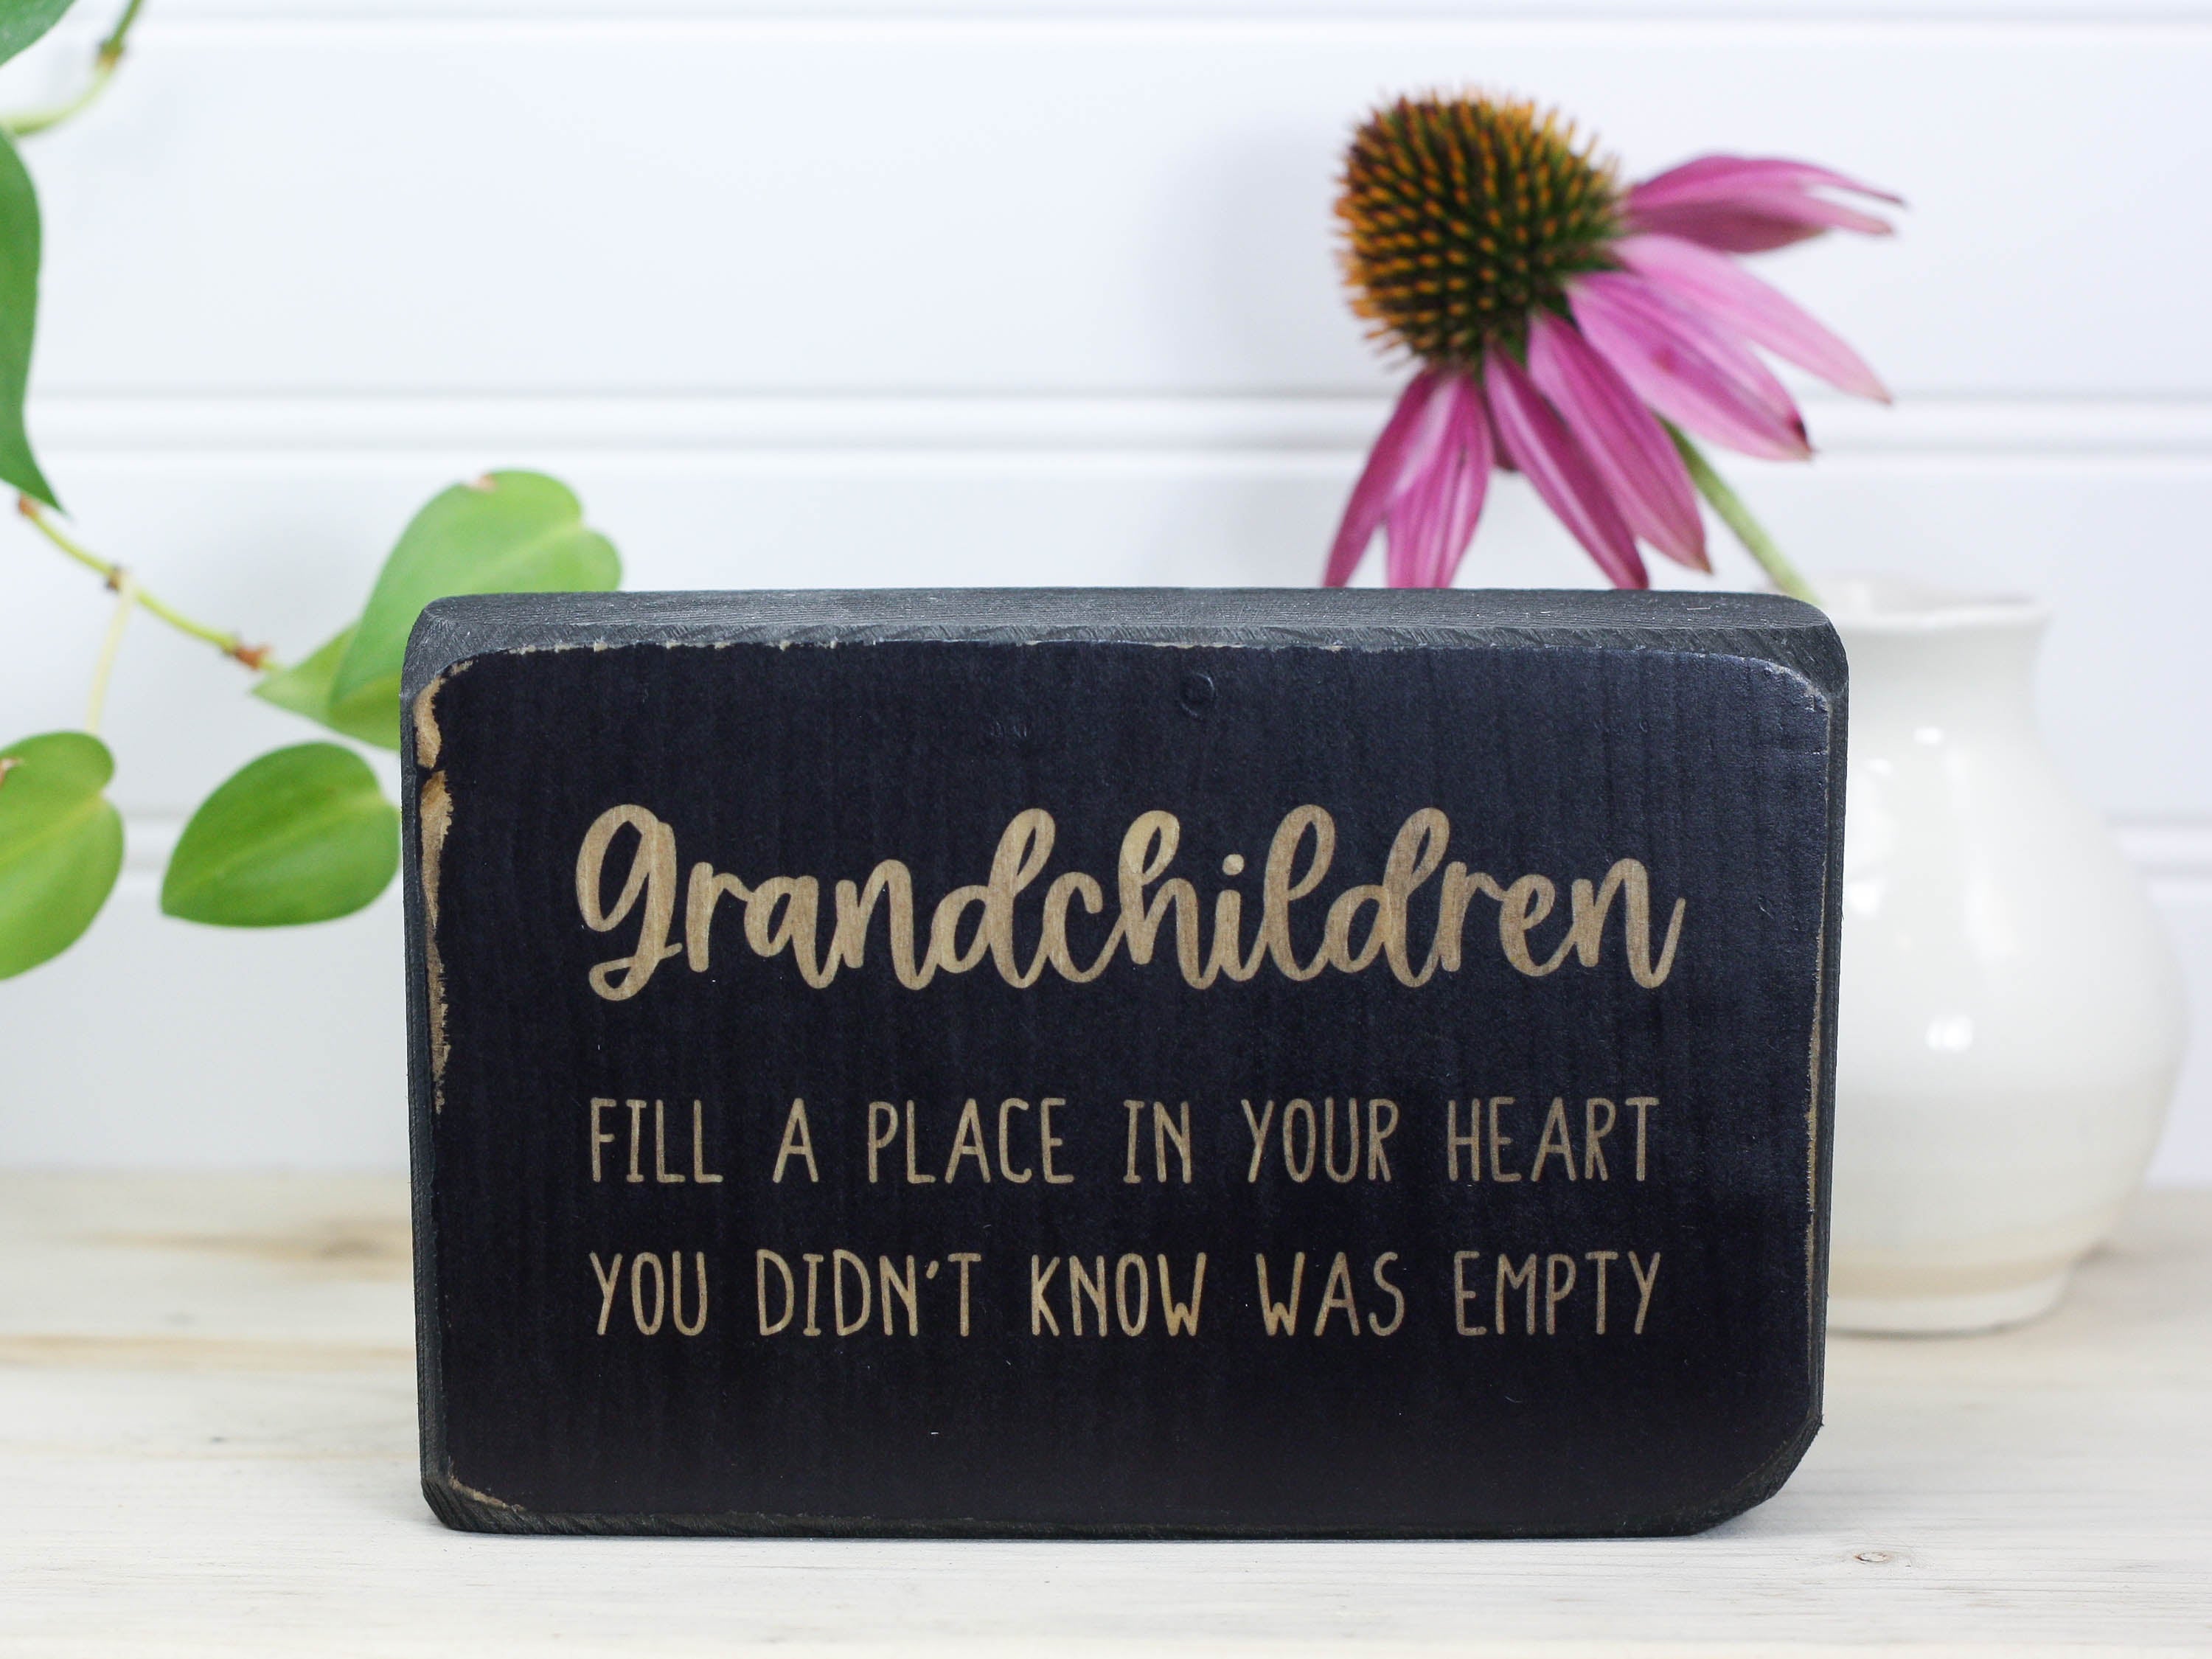 Small distressed black wooden sign with the saying "Grandchildren fill a place in your heart you didn't know was empty. "